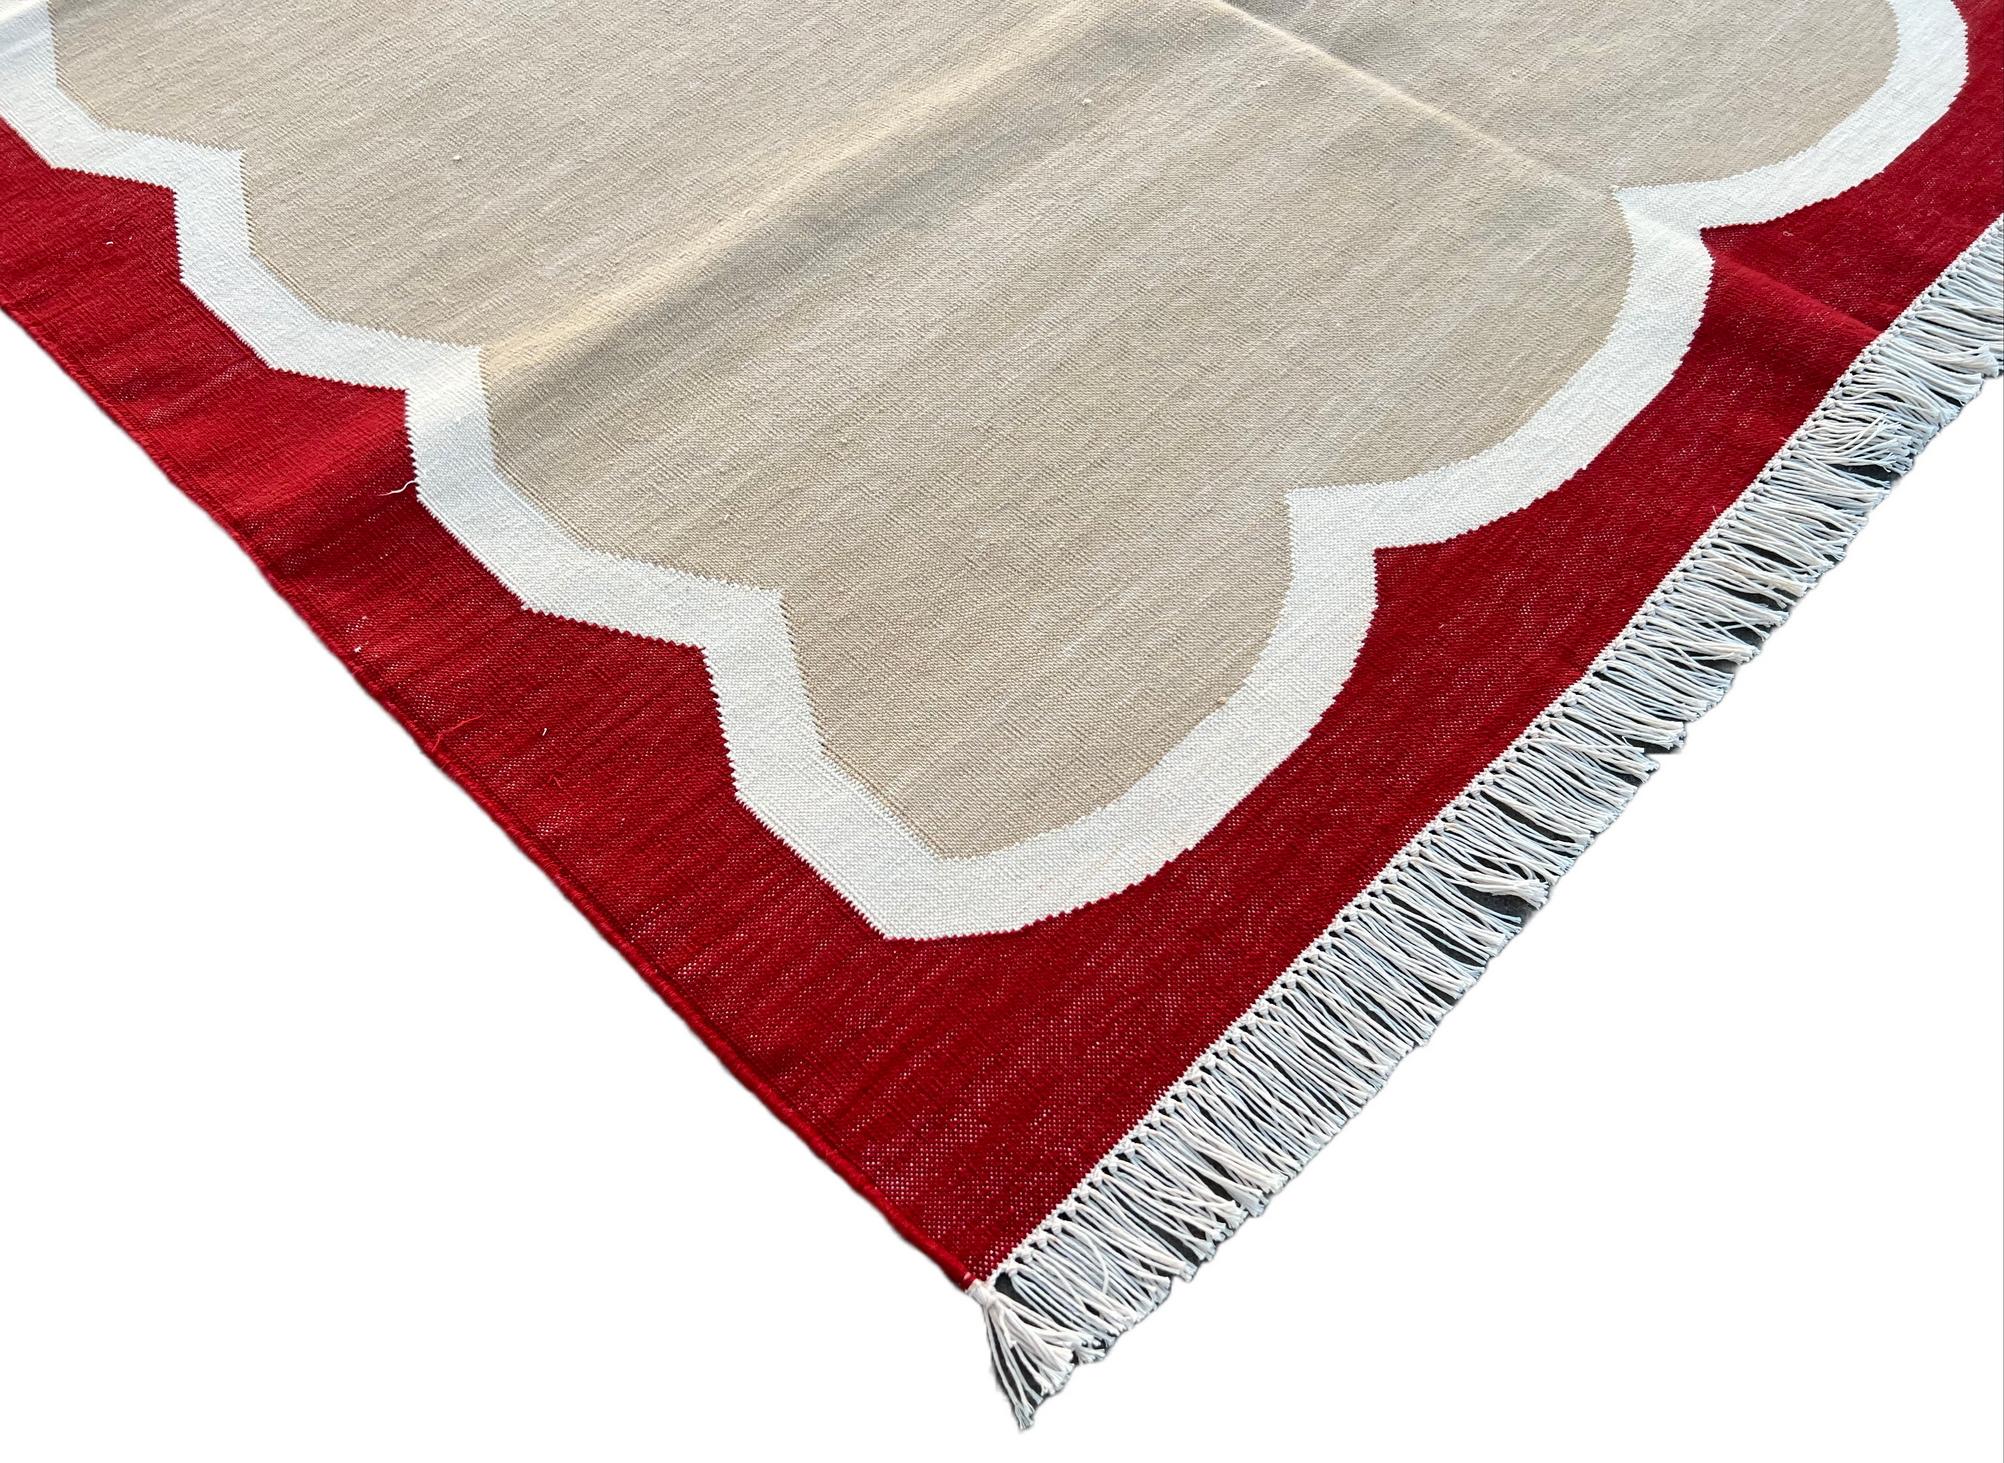 Mid-Century Modern Handmade Cotton Area Flat Weave Rug, 4x6 Beige And Red Scalloped Indian Dhurrie For Sale